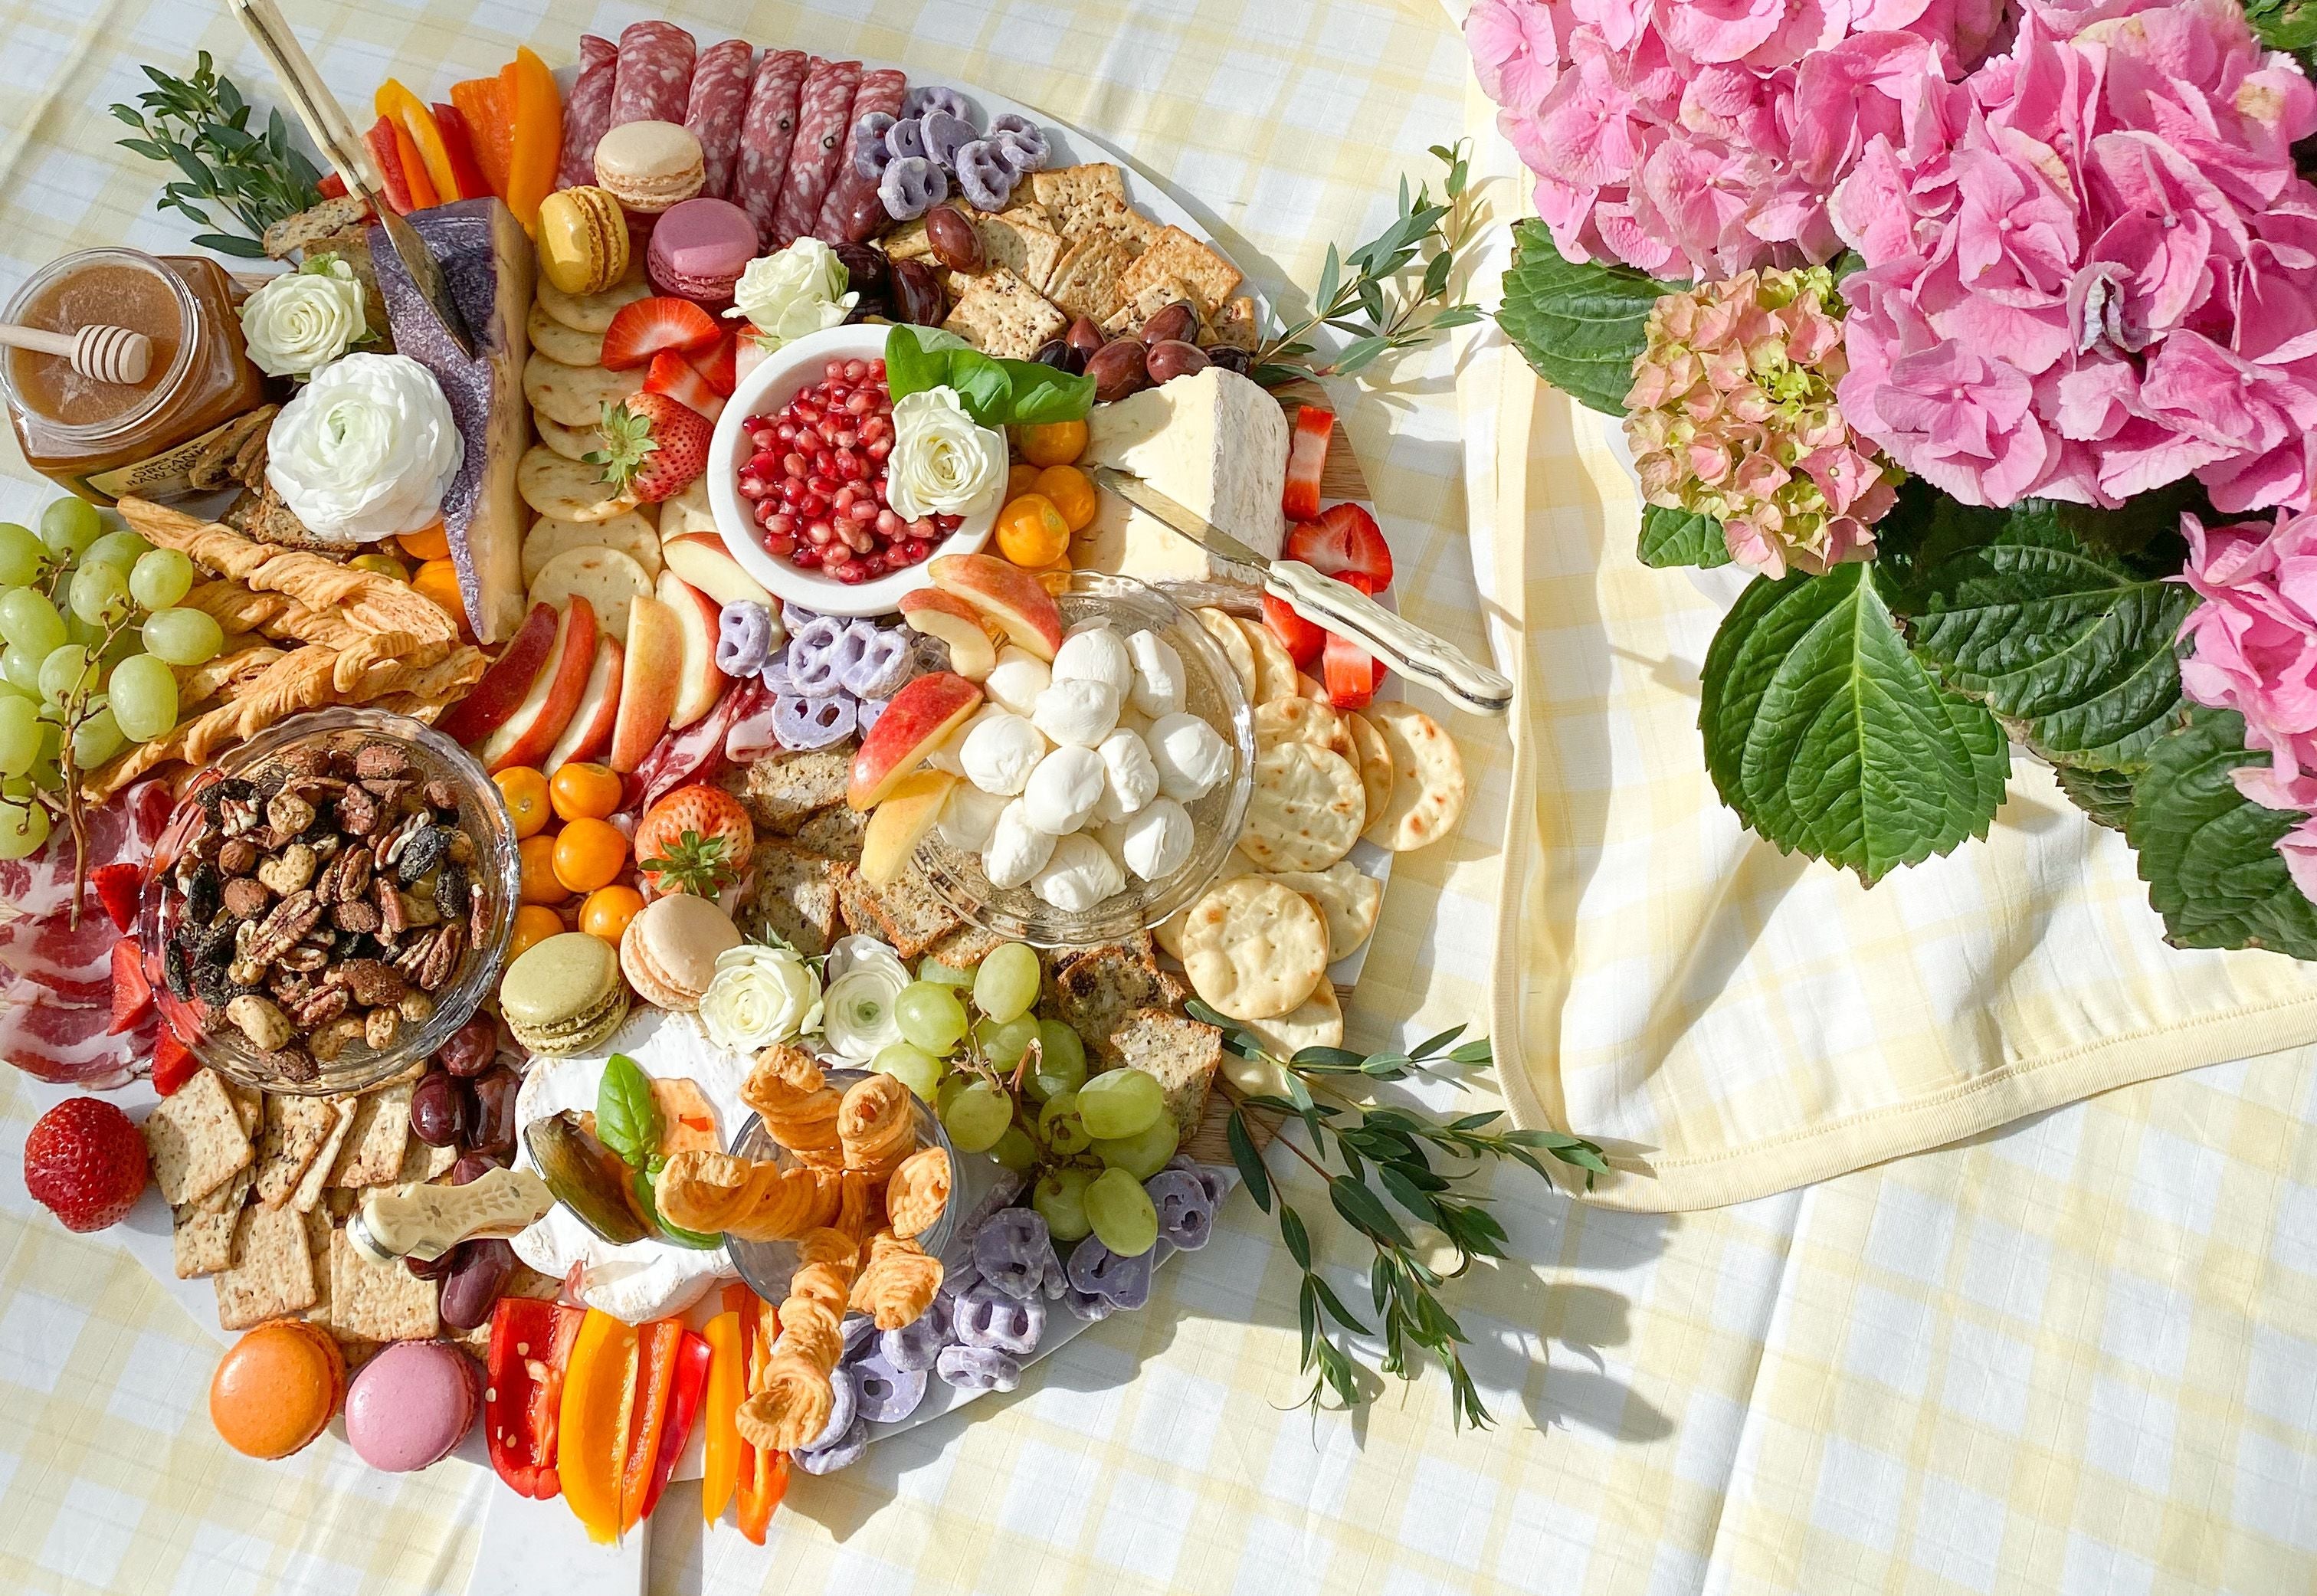 How to DIY a Stunning Charcuterie Board 🧀